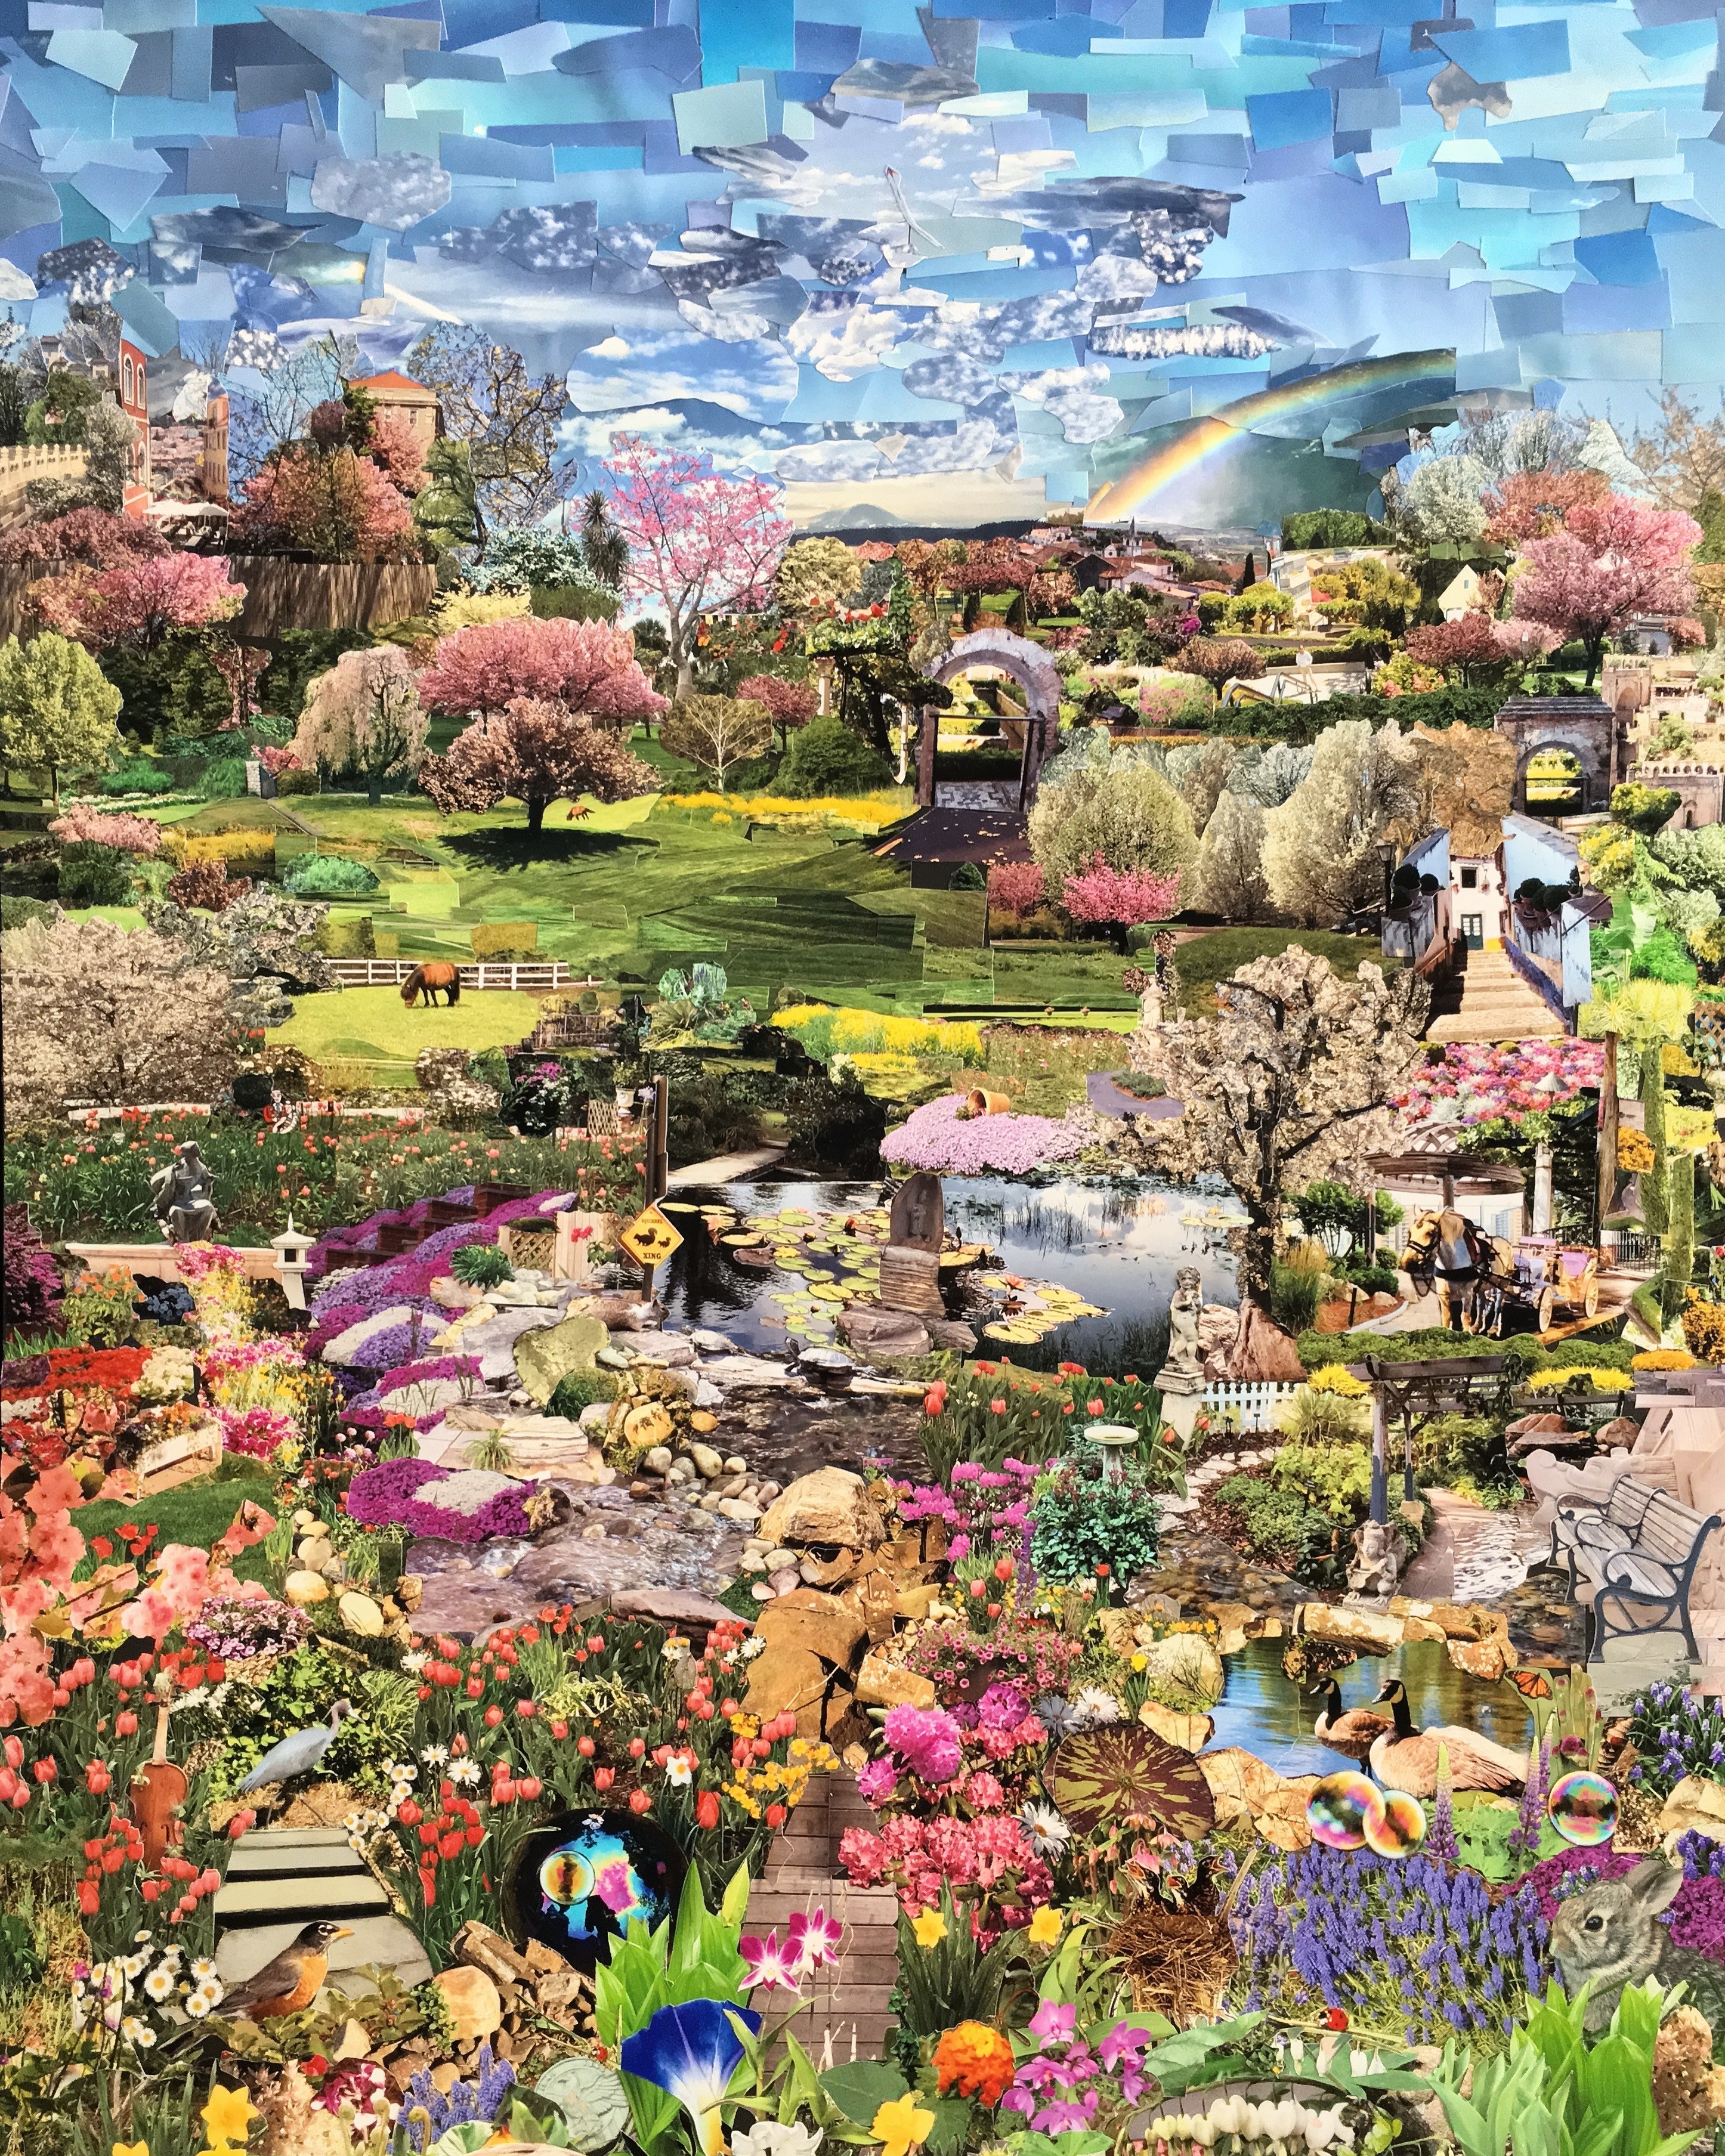 One of four panels, themes “The Four Seasons - Spring Garden,” 40 x 30 in., Created in 2018 in collaboration with the patients and families of the Yale New Haven Children’s Hospital for their Arts for Healing program